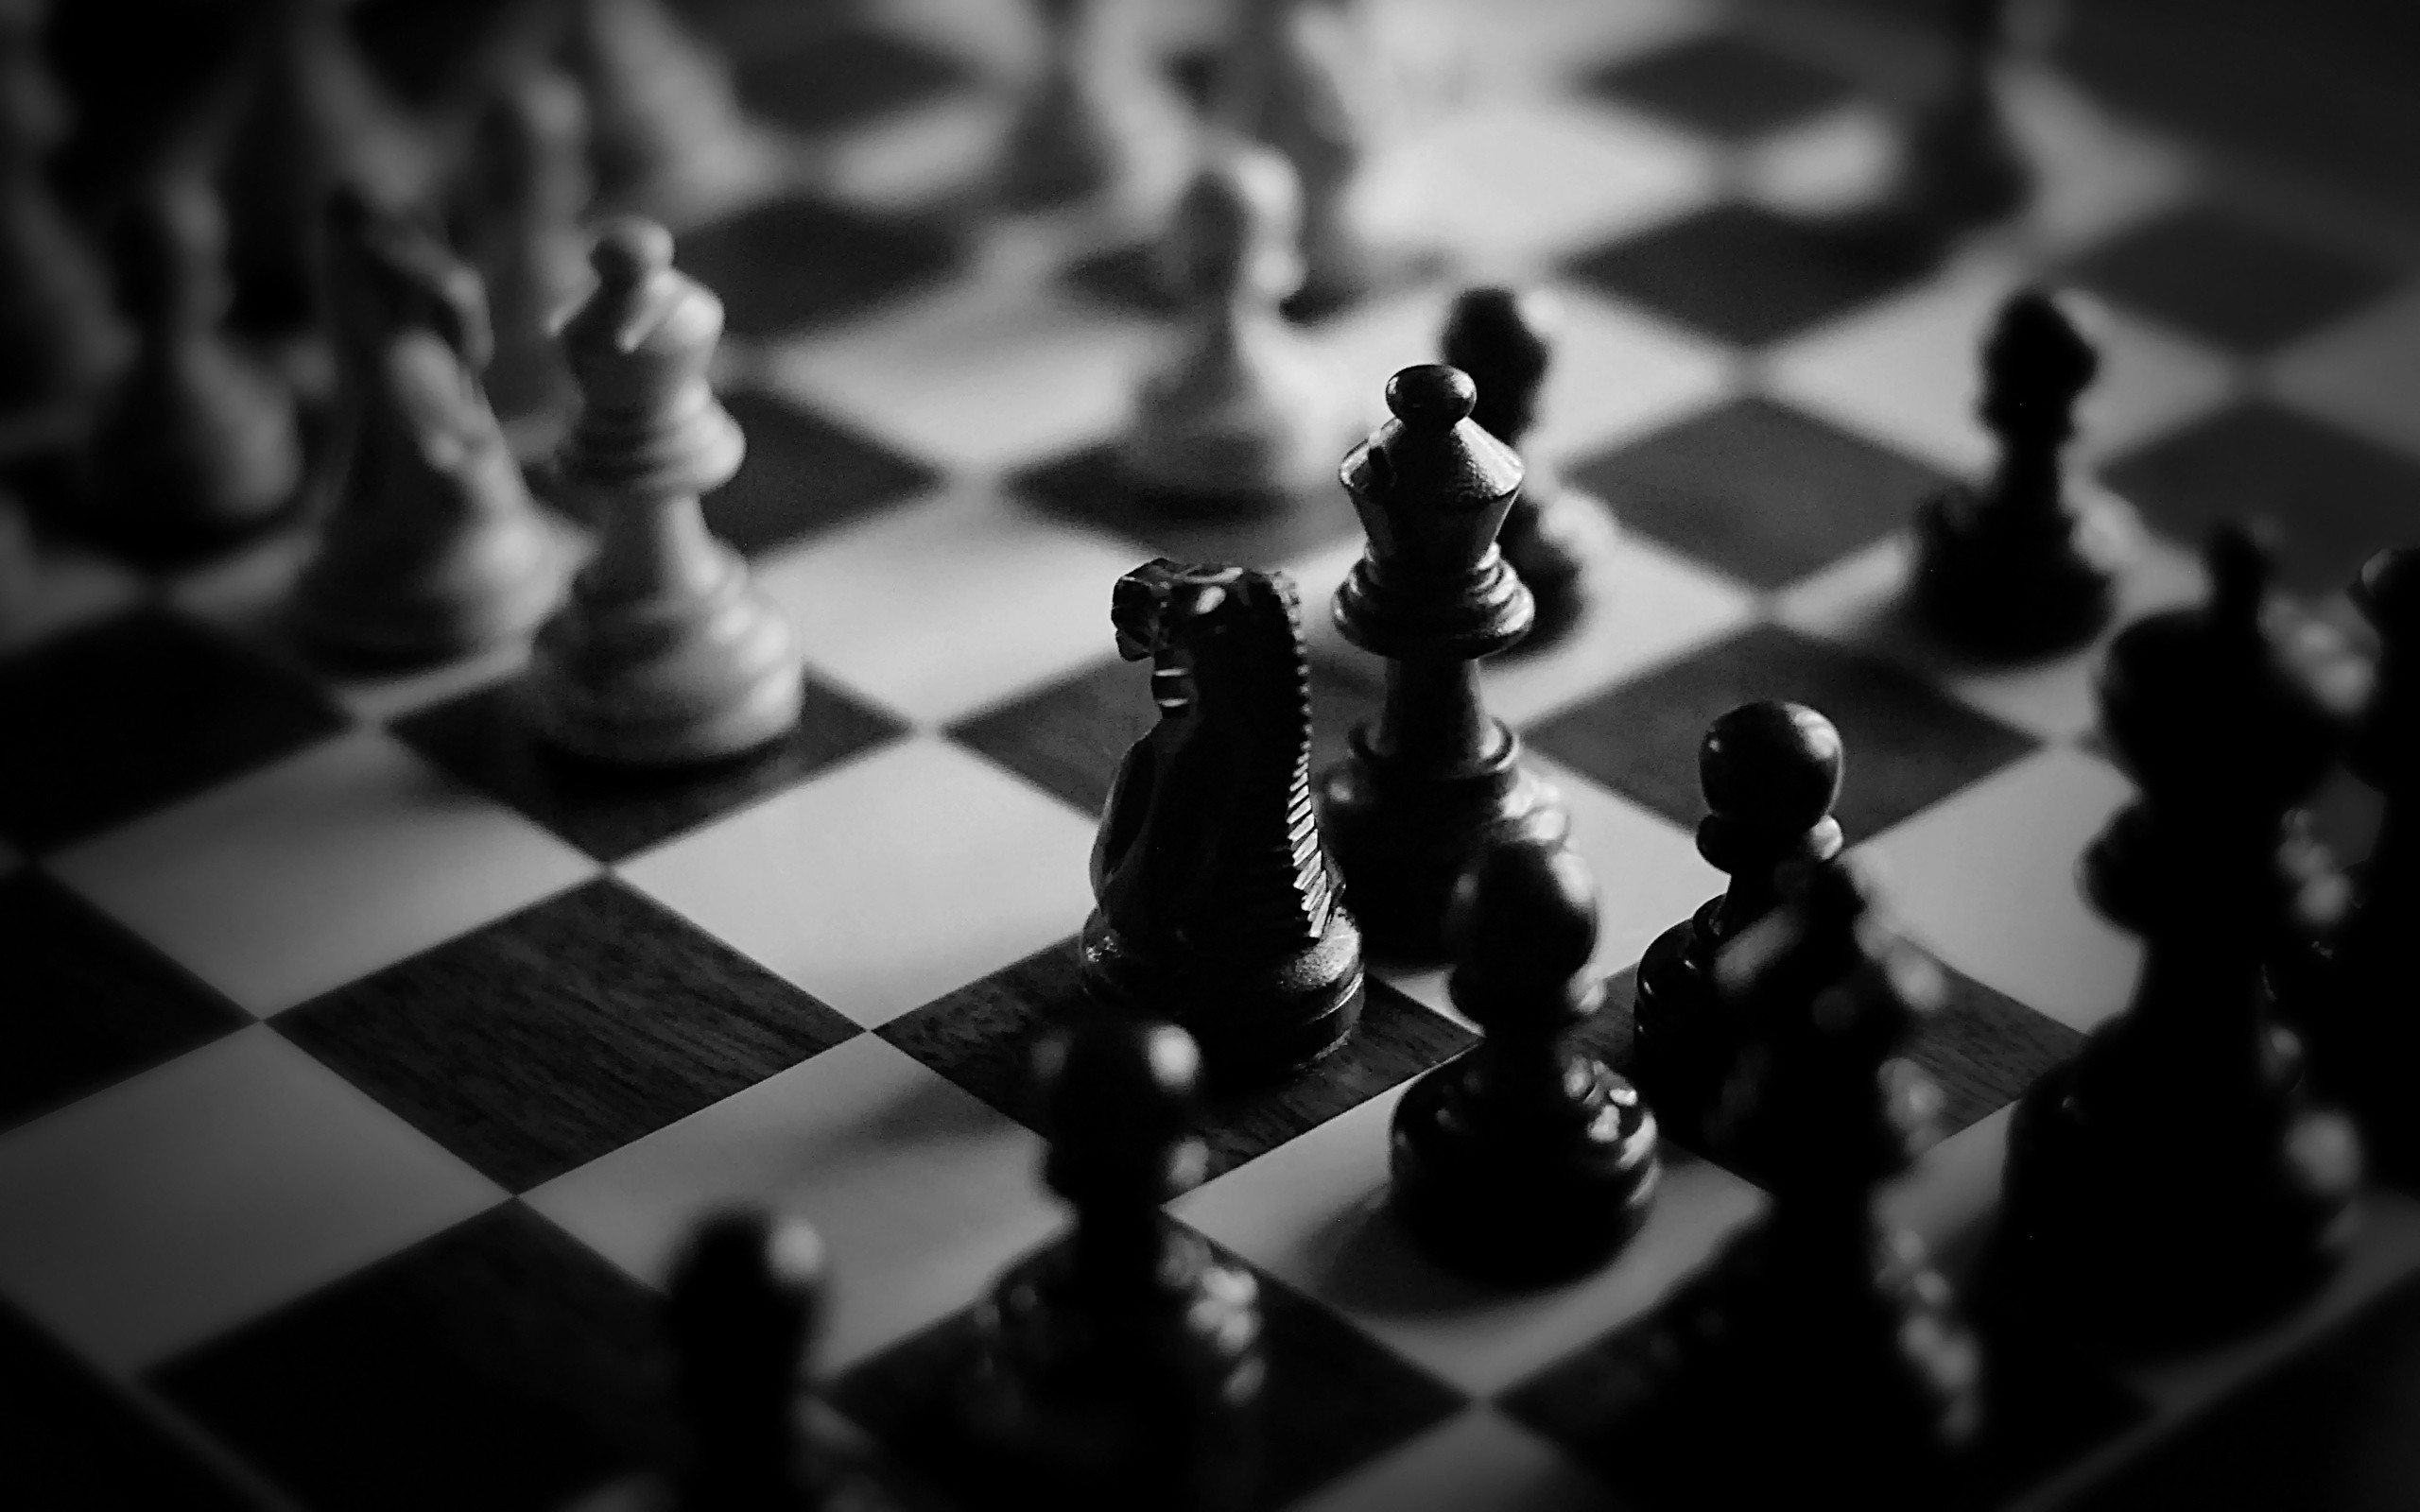 170+ Chess HD Wallpapers and Backgrounds